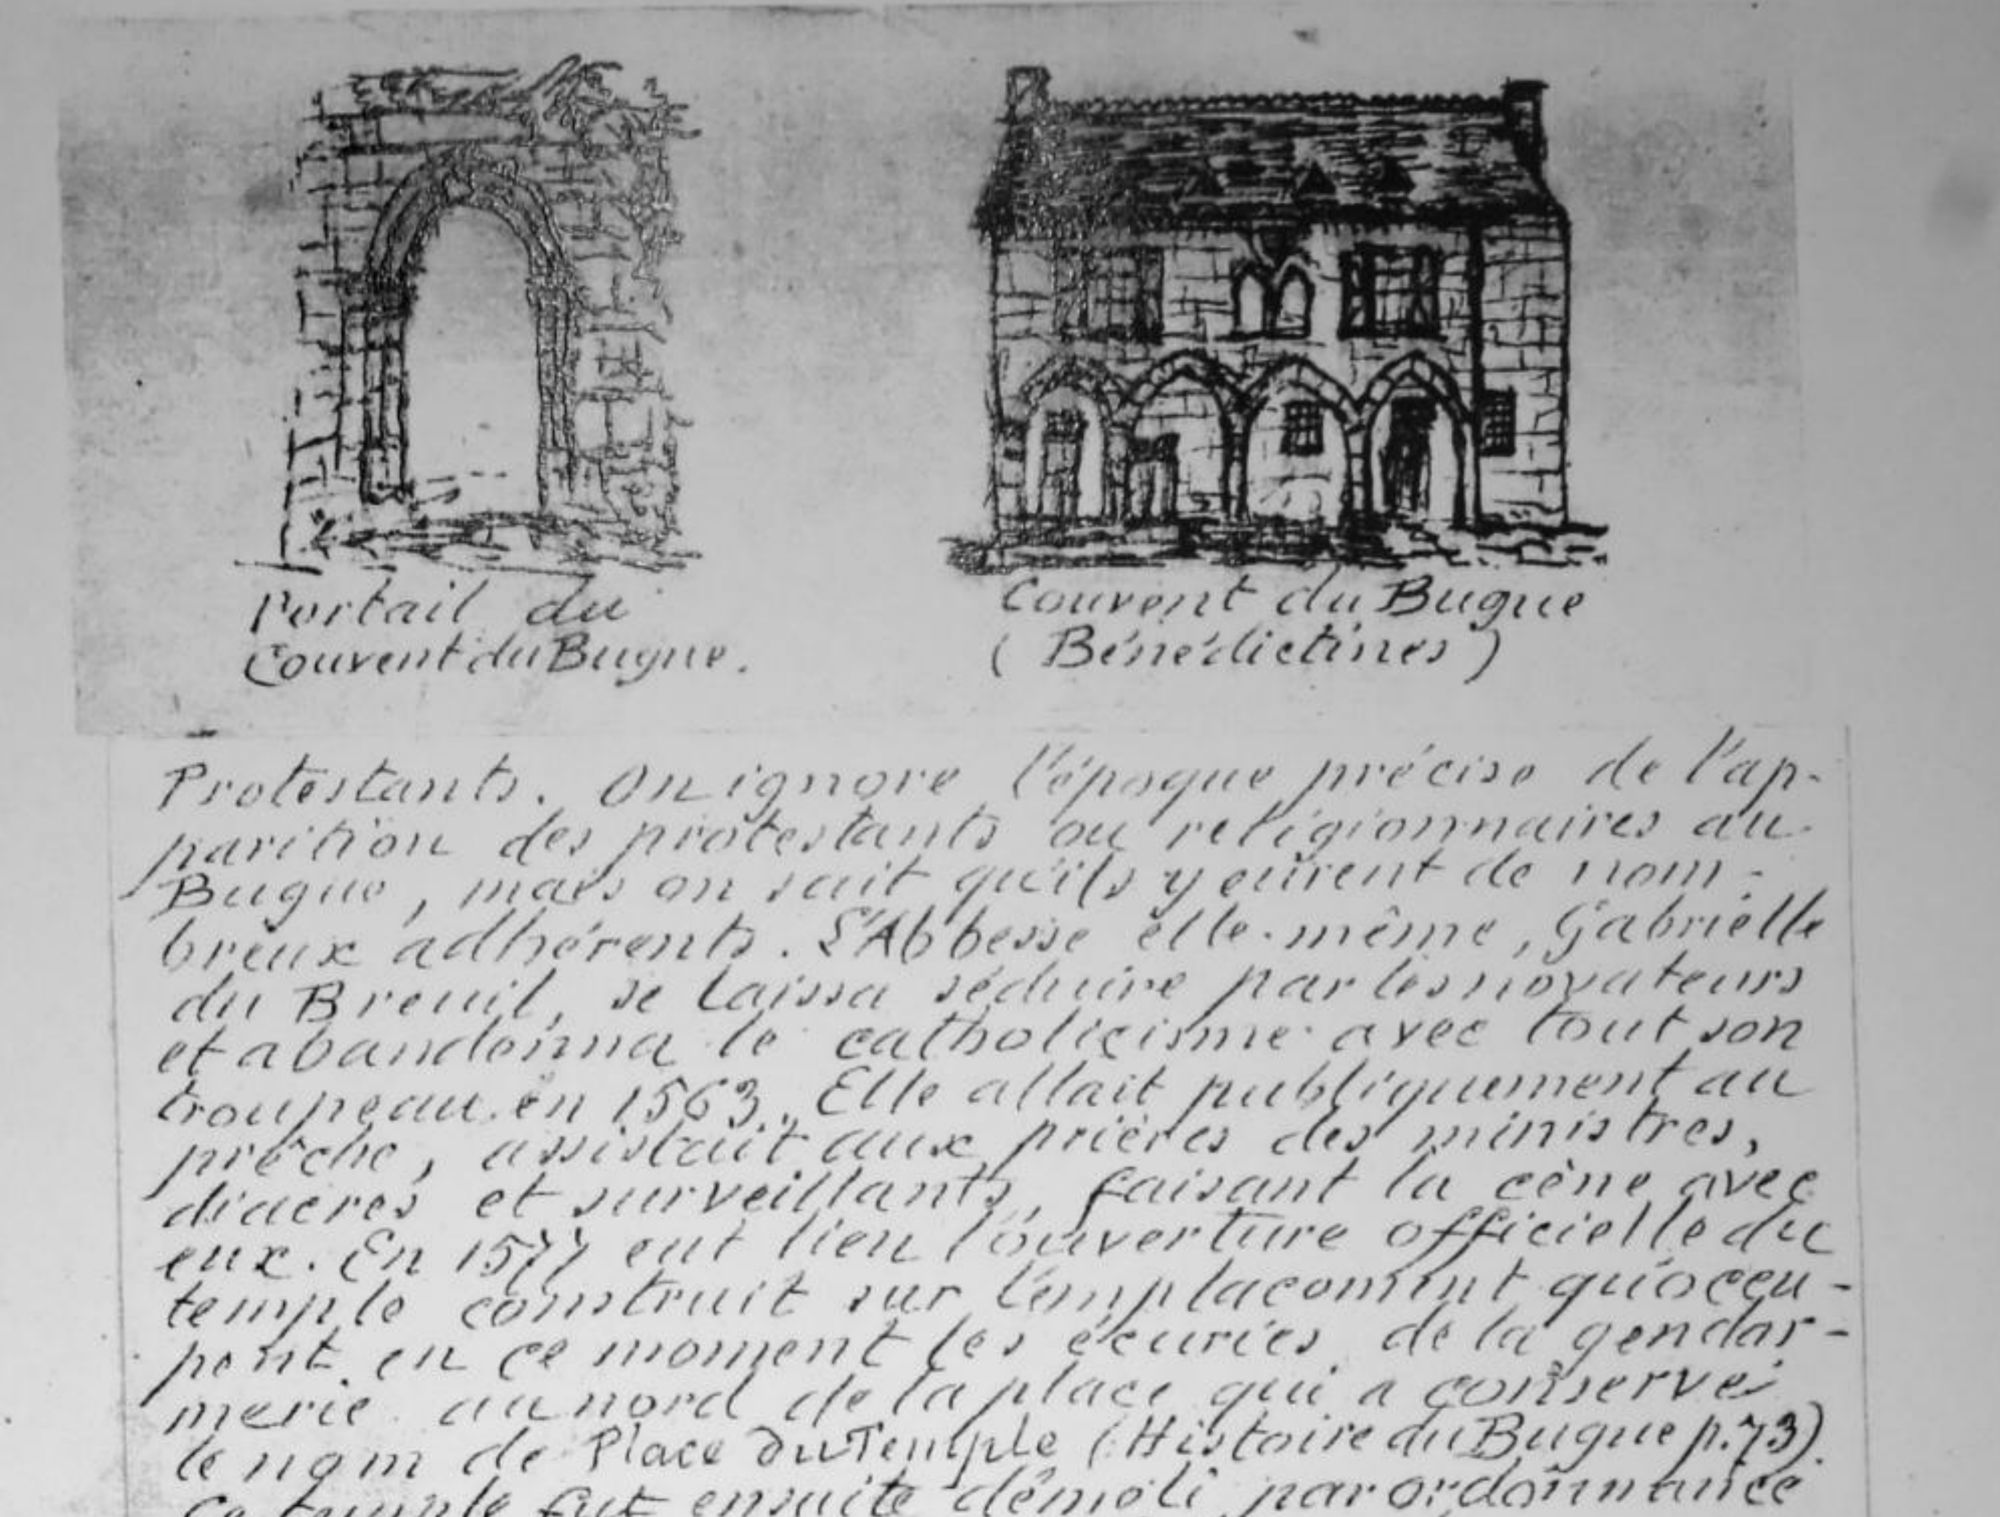 Gate and remains of the convent of Le Bugue according to the manuscript of Canon Hippolyte Brugière